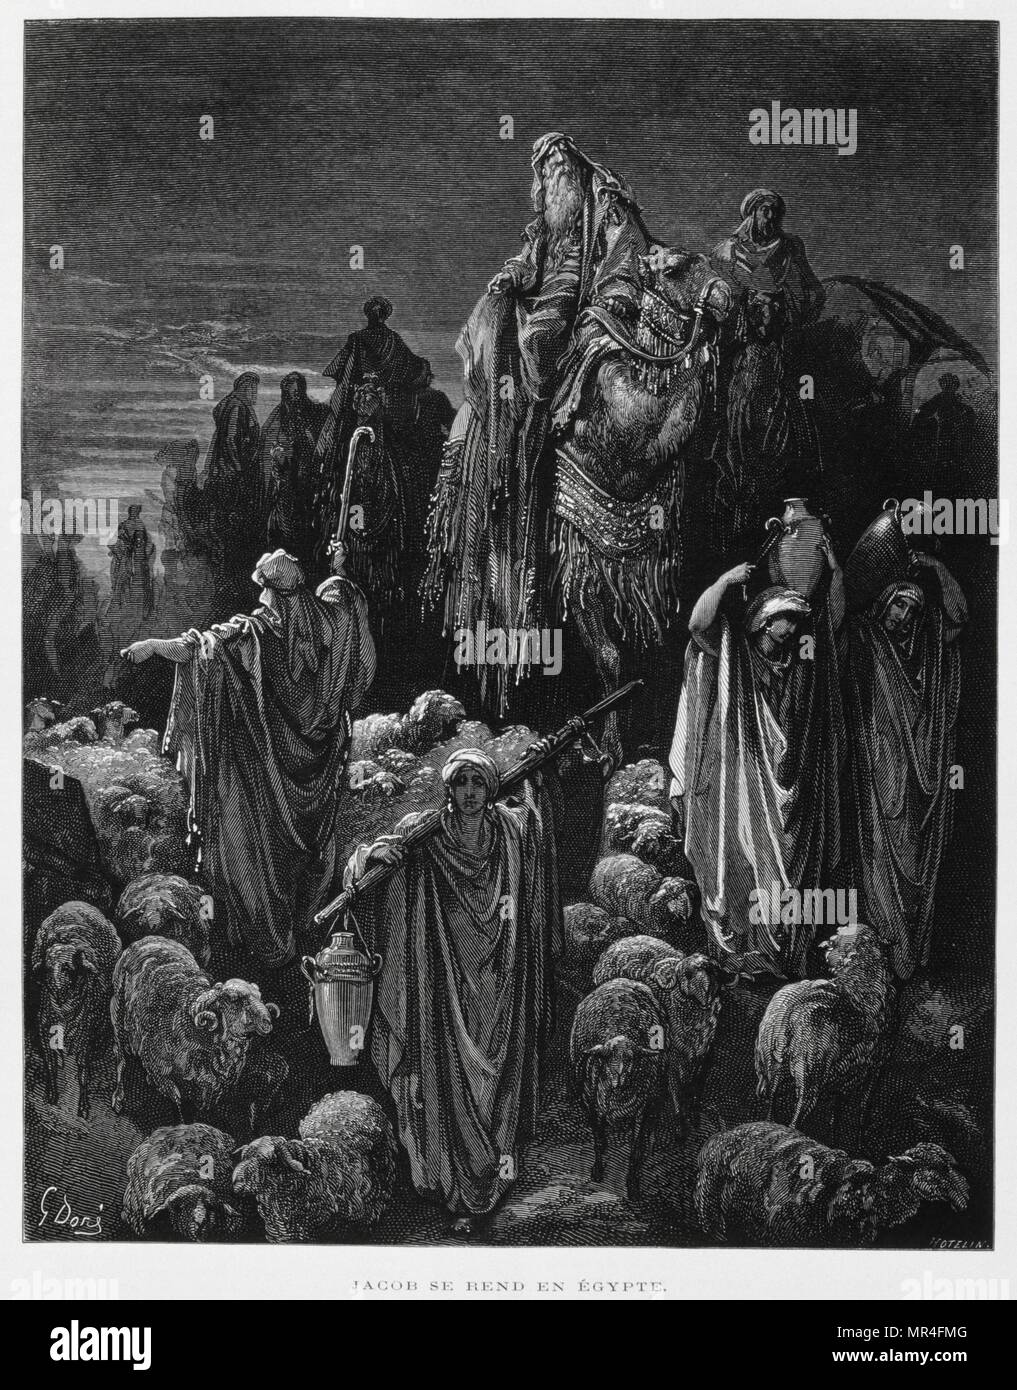 Jacob and his sons arrive in Egypt, Illustration from the Dore Bible 1866. In 1866, the French artist and illustrator Gustave Doré (1832–1883), published a series of 241 wood engravings for a new deluxe edition of the 1843 French translation of the Vulgate Bible, popularly known as the Bible de Tours. This new edition was known as La Grande Bible de Tours and its illustrations were immensely successful. Stock Photo